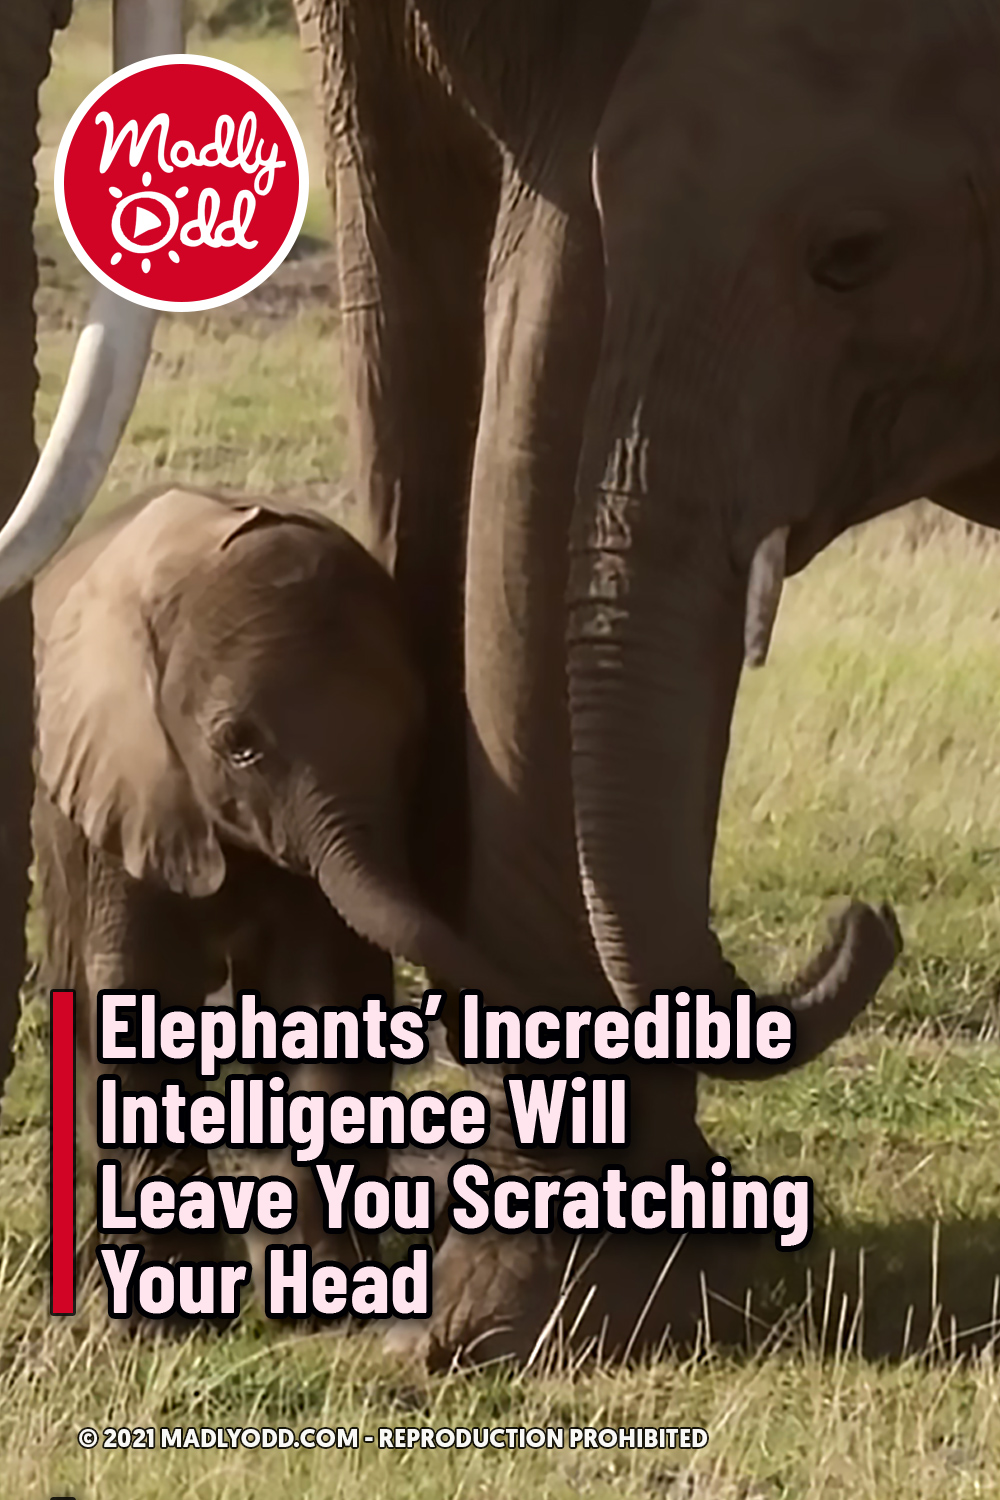 Elephants’ Incredible Intelligence Will Leave You Scratching Your Head